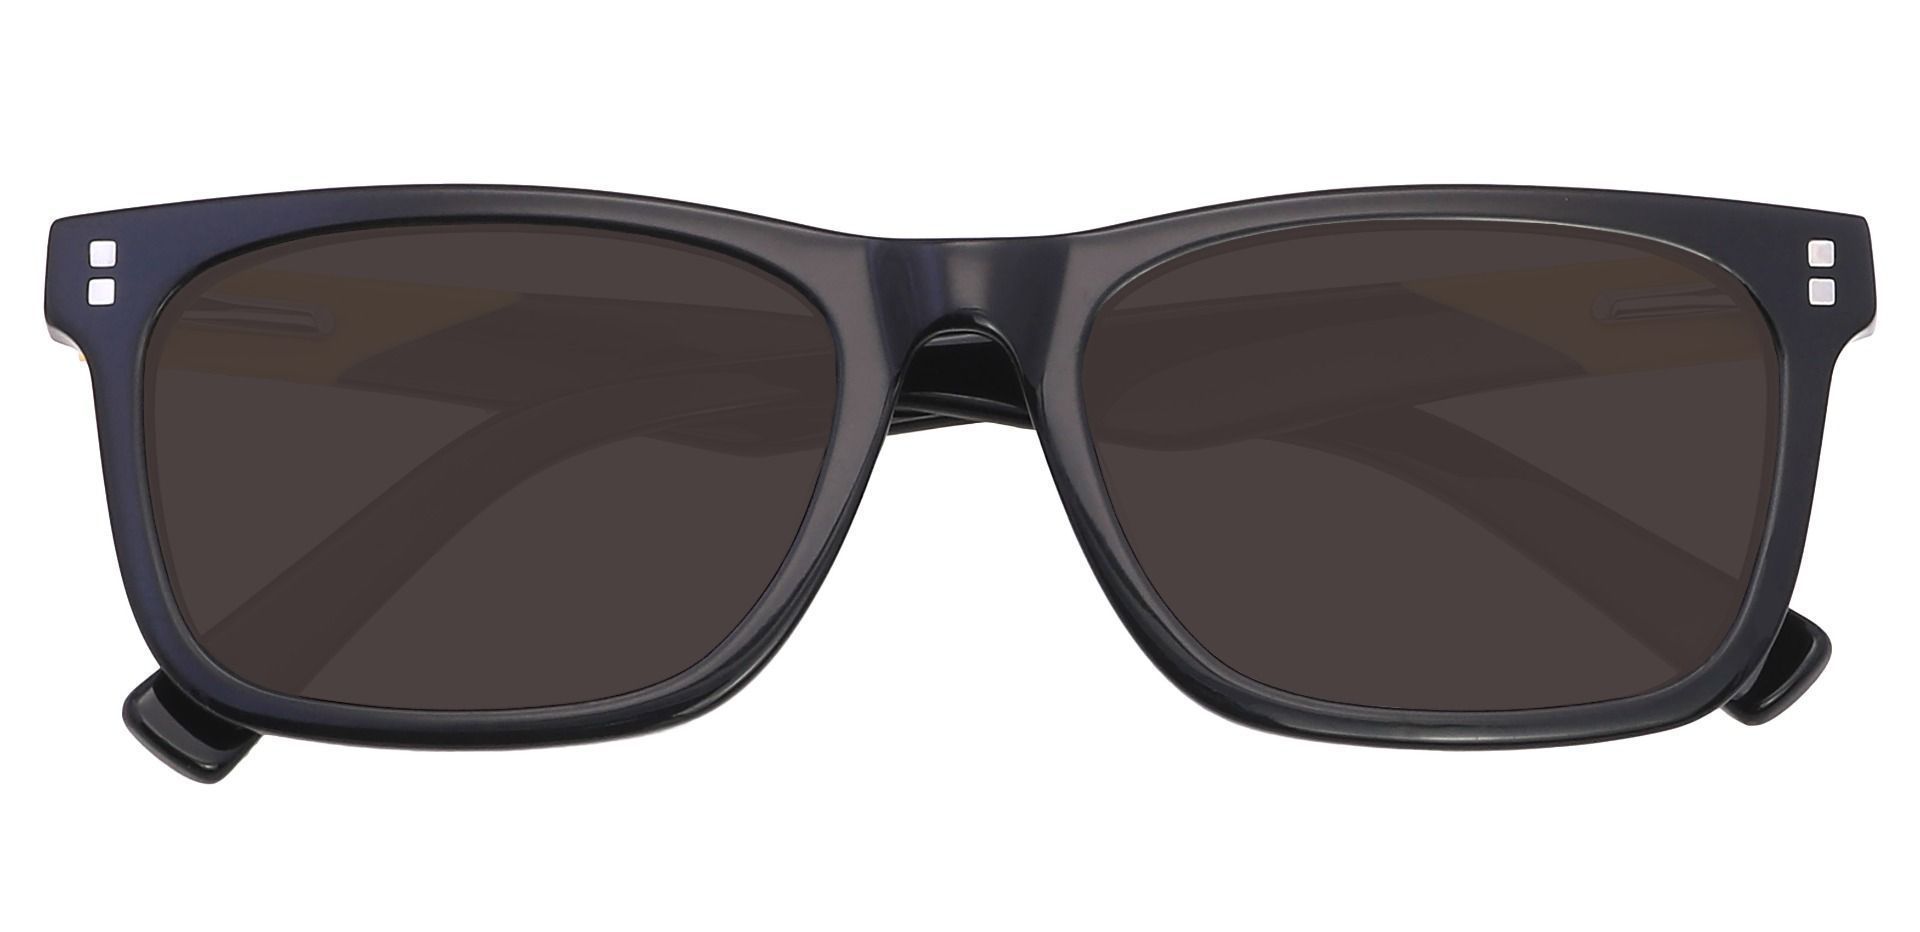 Liberty Rectangle Non-Rx Sunglasses - Black Frame With Gray Lenses